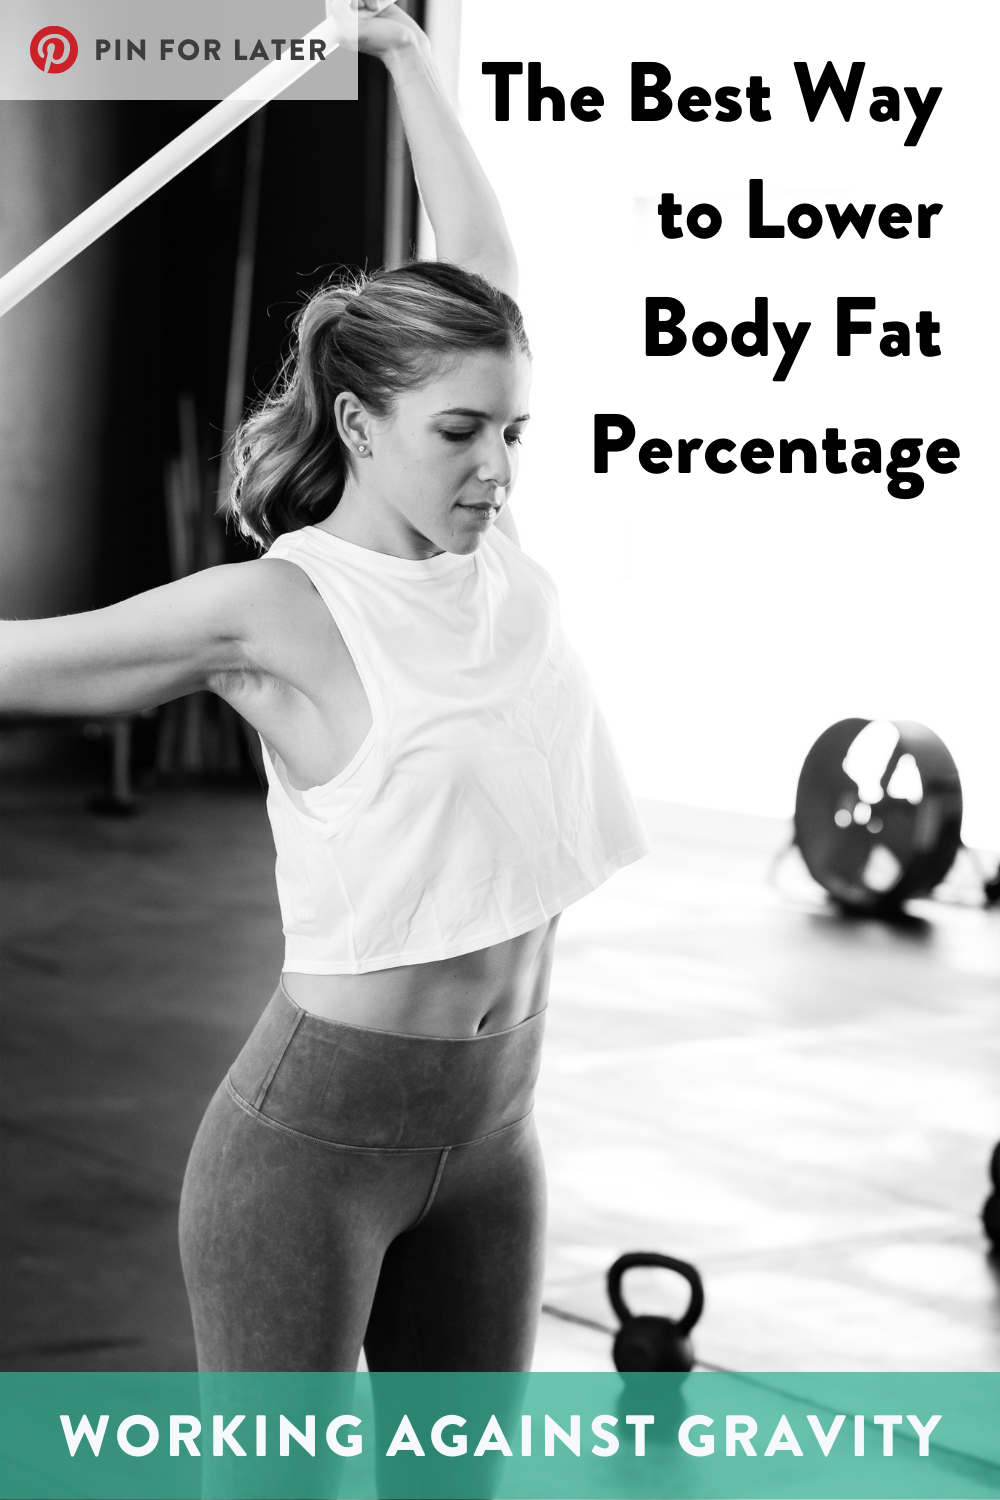 The Best Way to Lower Body Fat Percentage